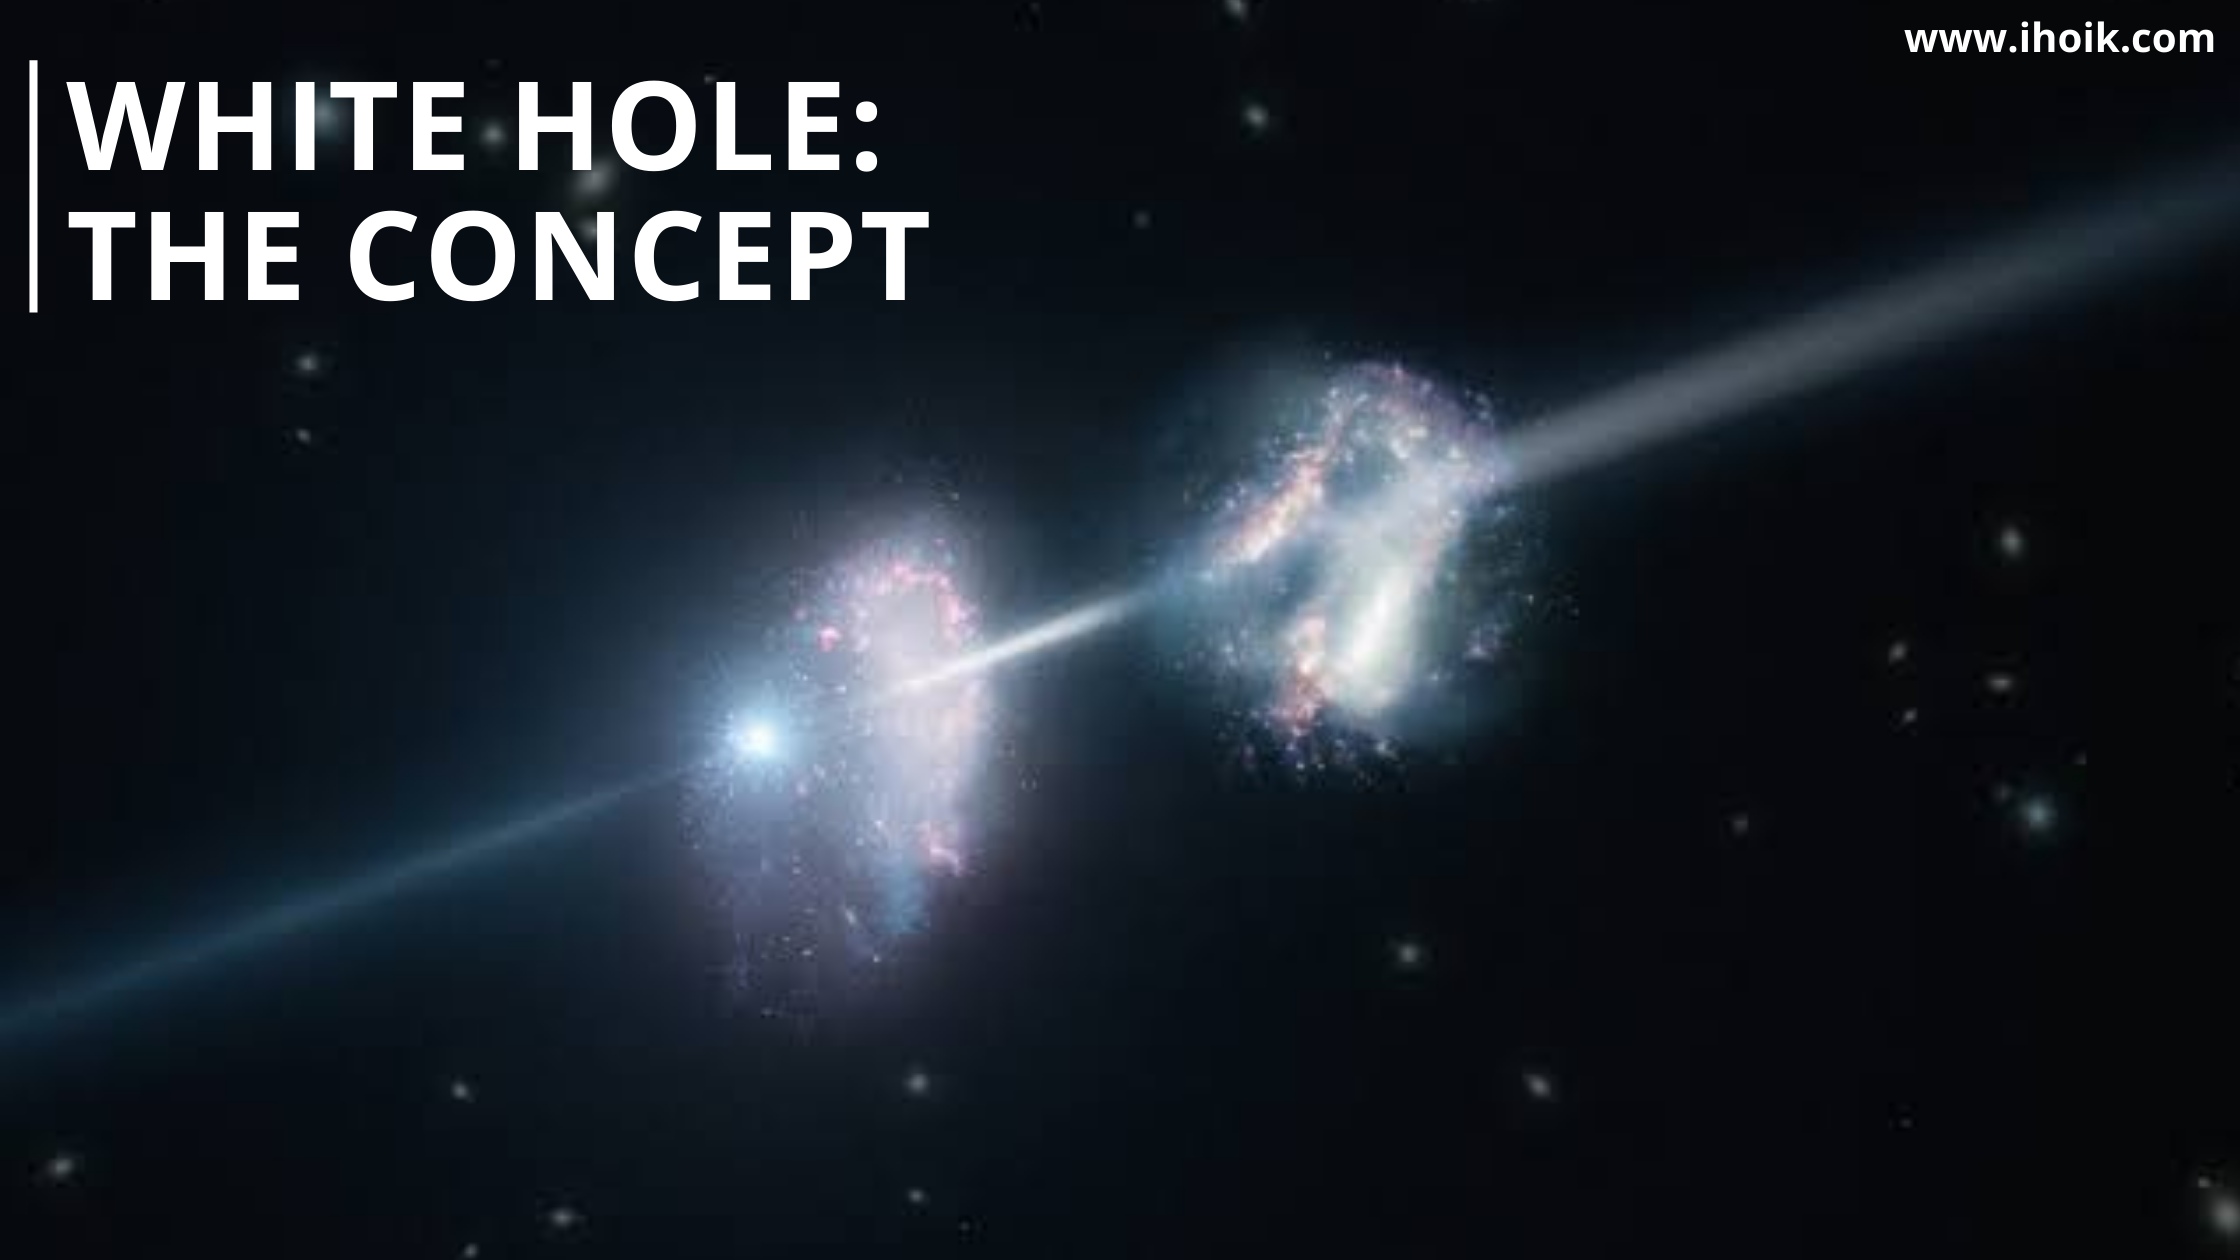 White Hole: The concept